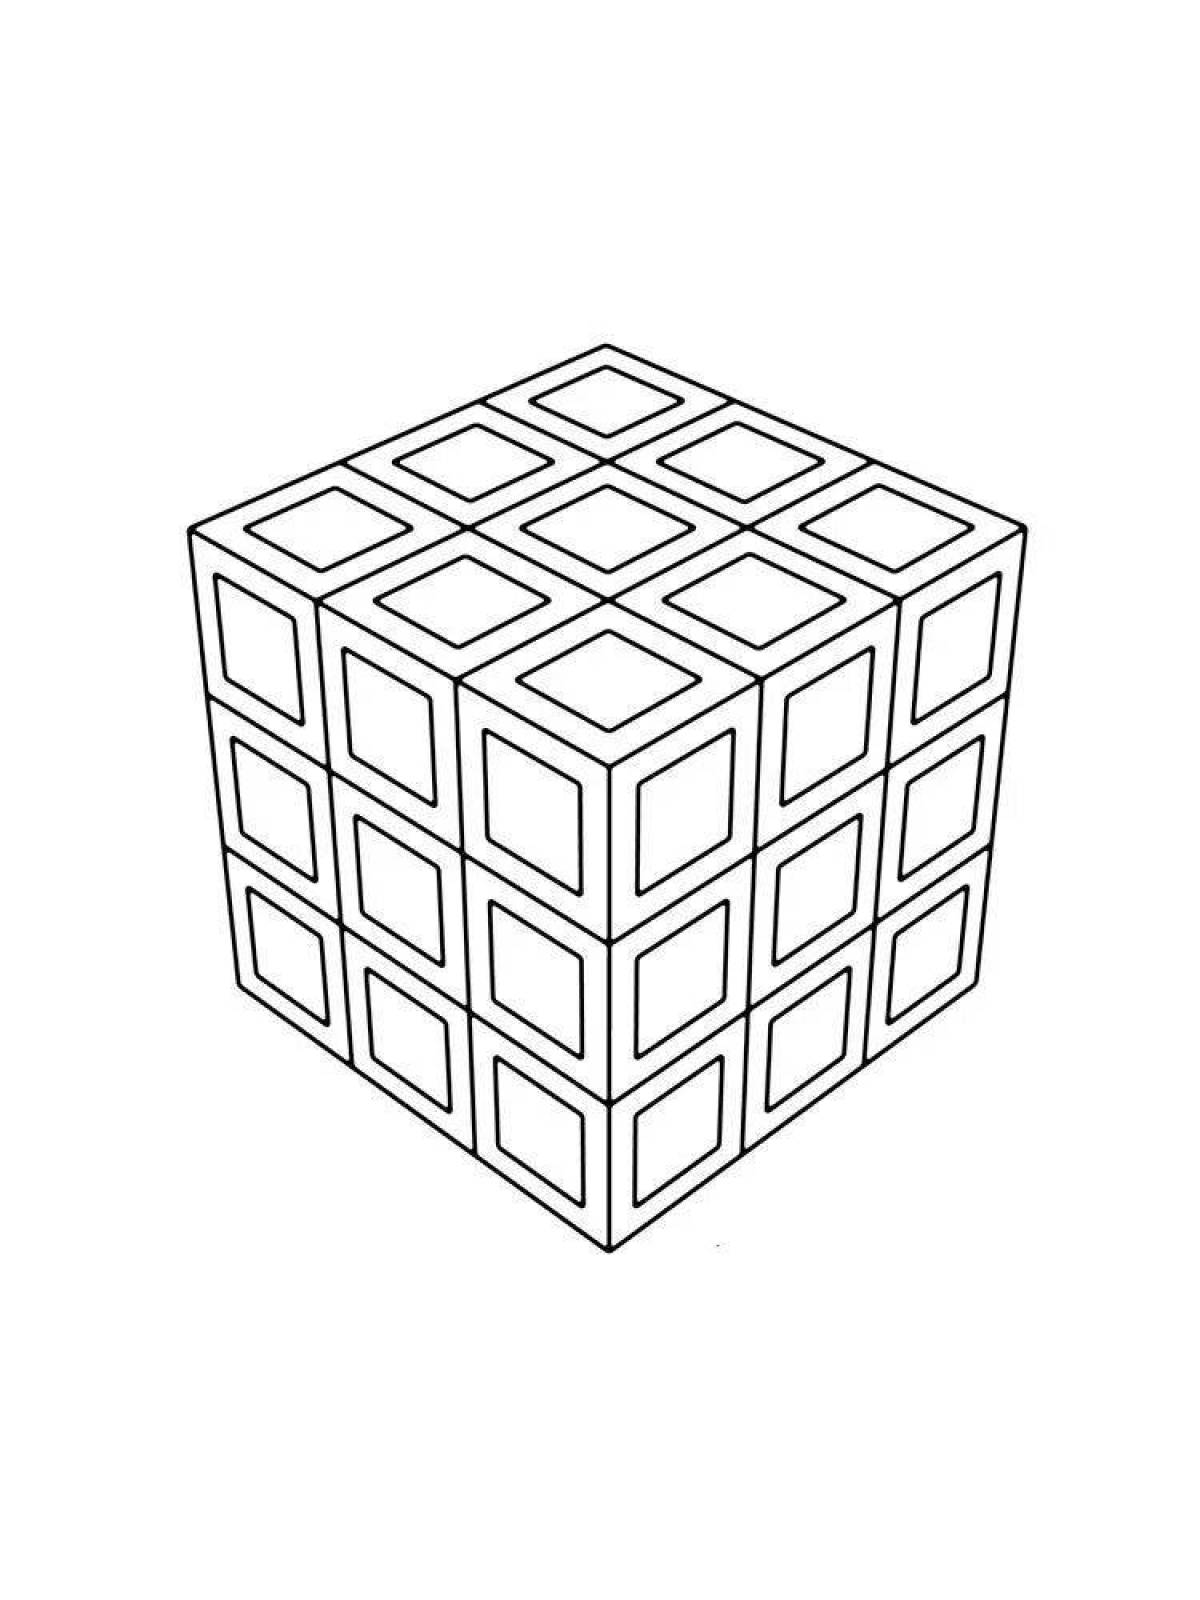 Exciting rubik's cube coloring